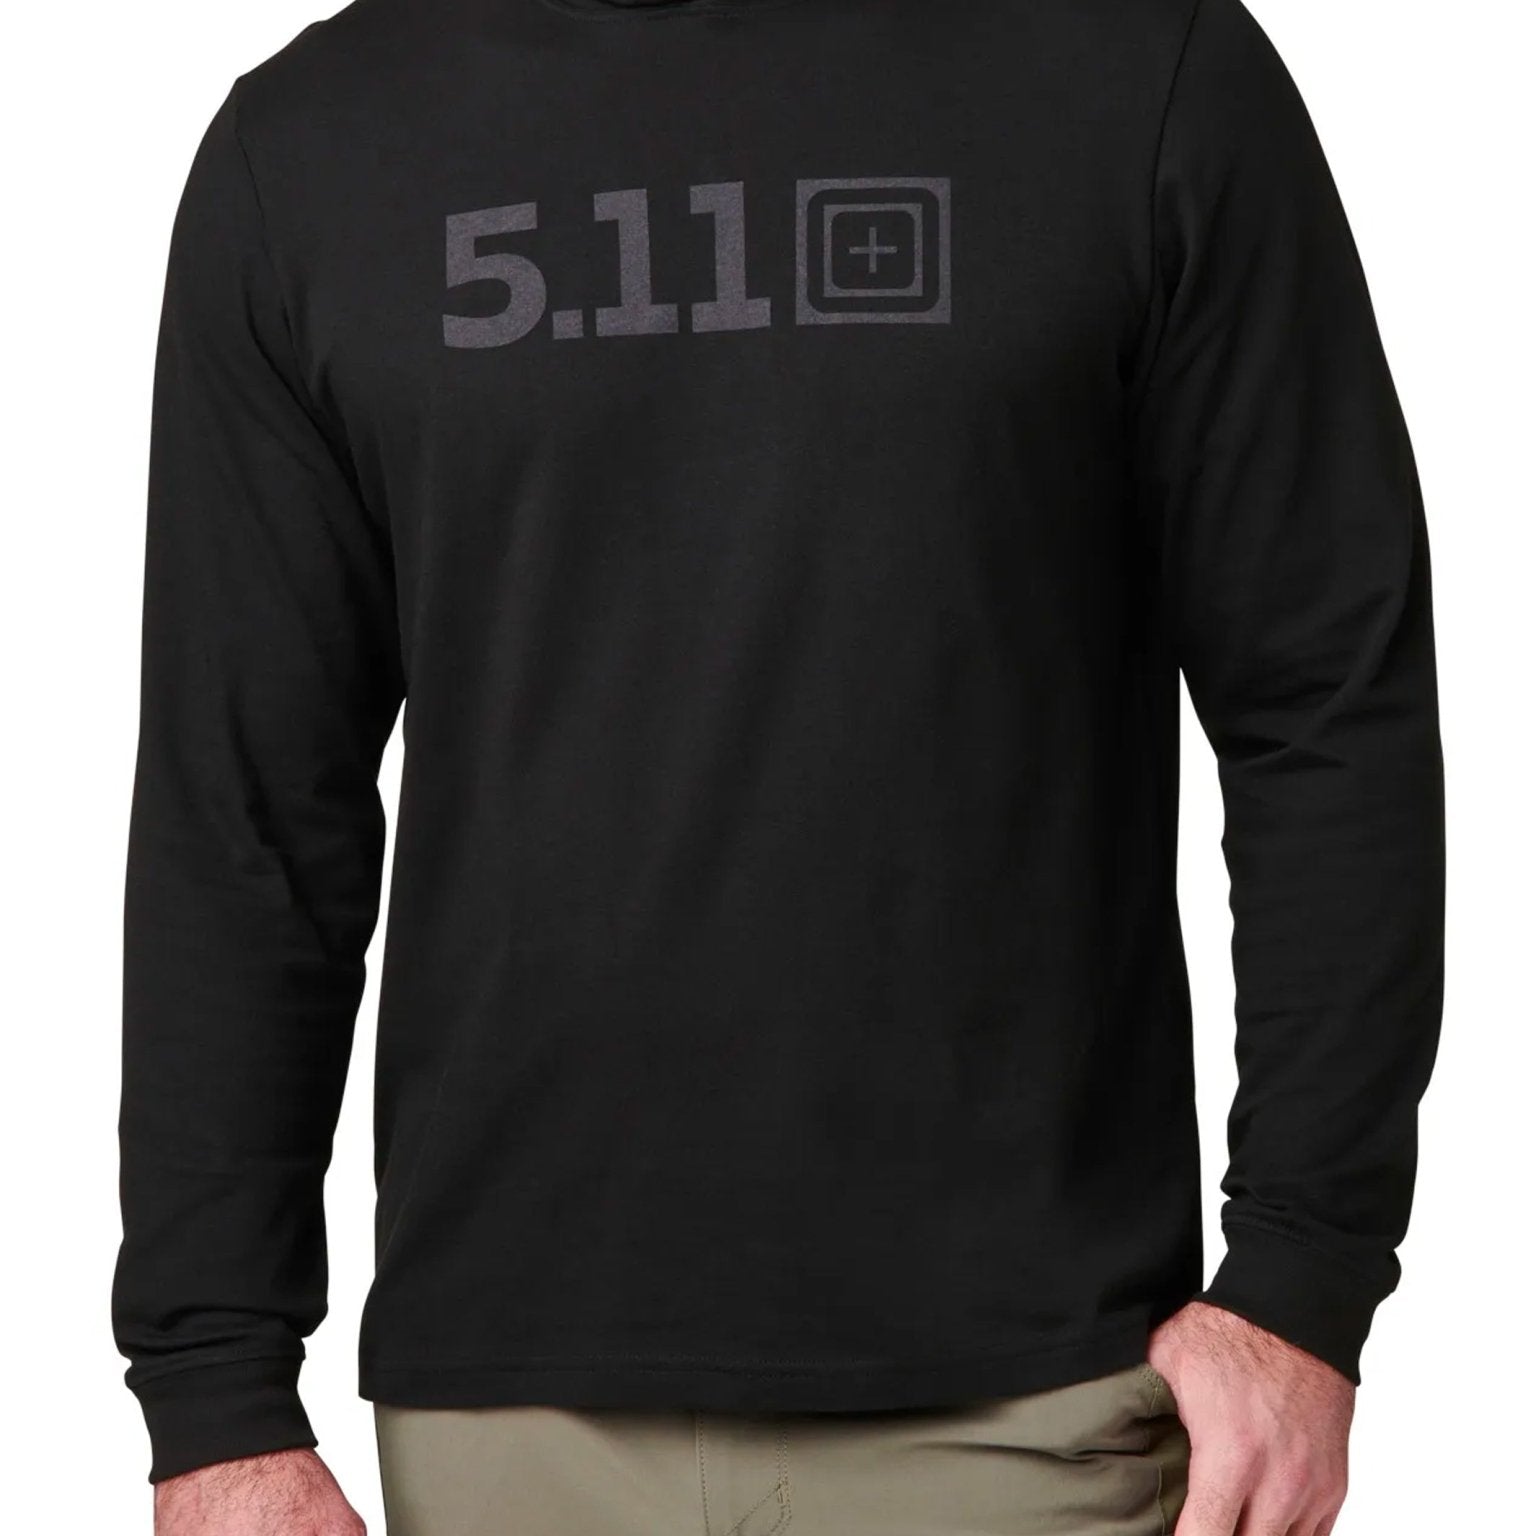 4elementsclothing5.11 Tactical5.11 Tactical - 5.11 HOODED LONG SLEEVE TEE Cotton Polyester moisture wicking - Style 76165T-Shirt76165-019-S